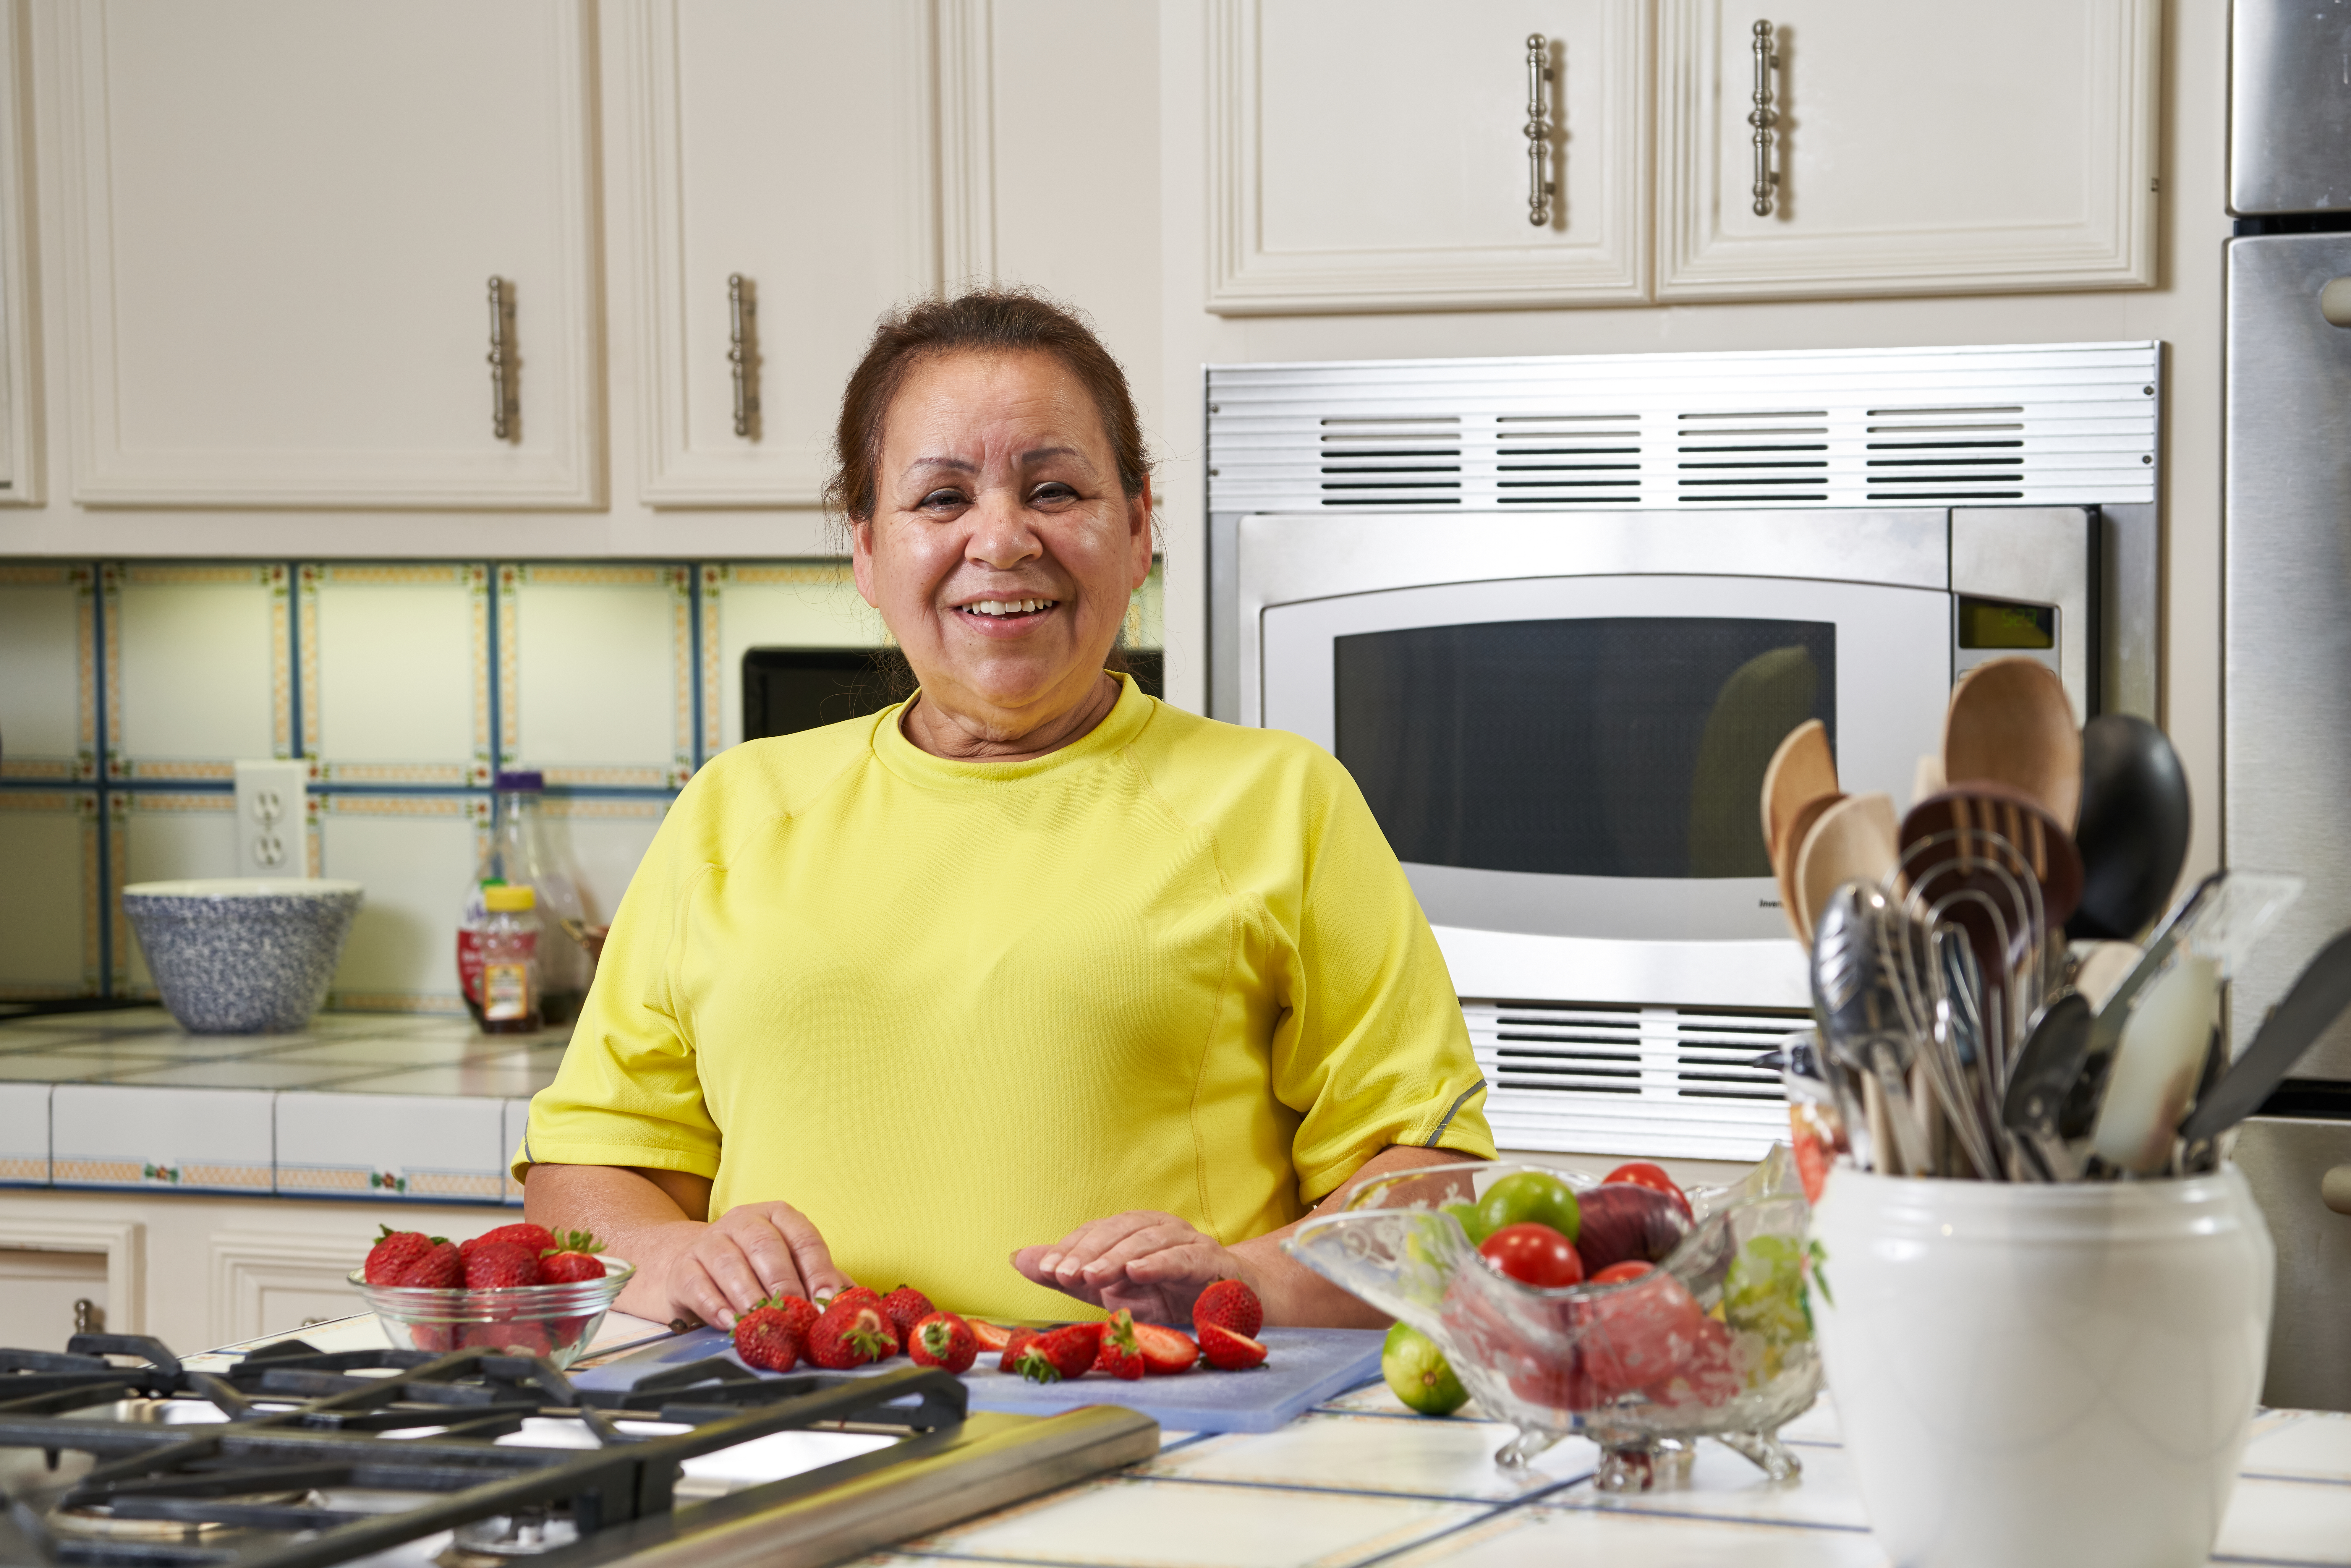 Woman cutting strawberries and smiling